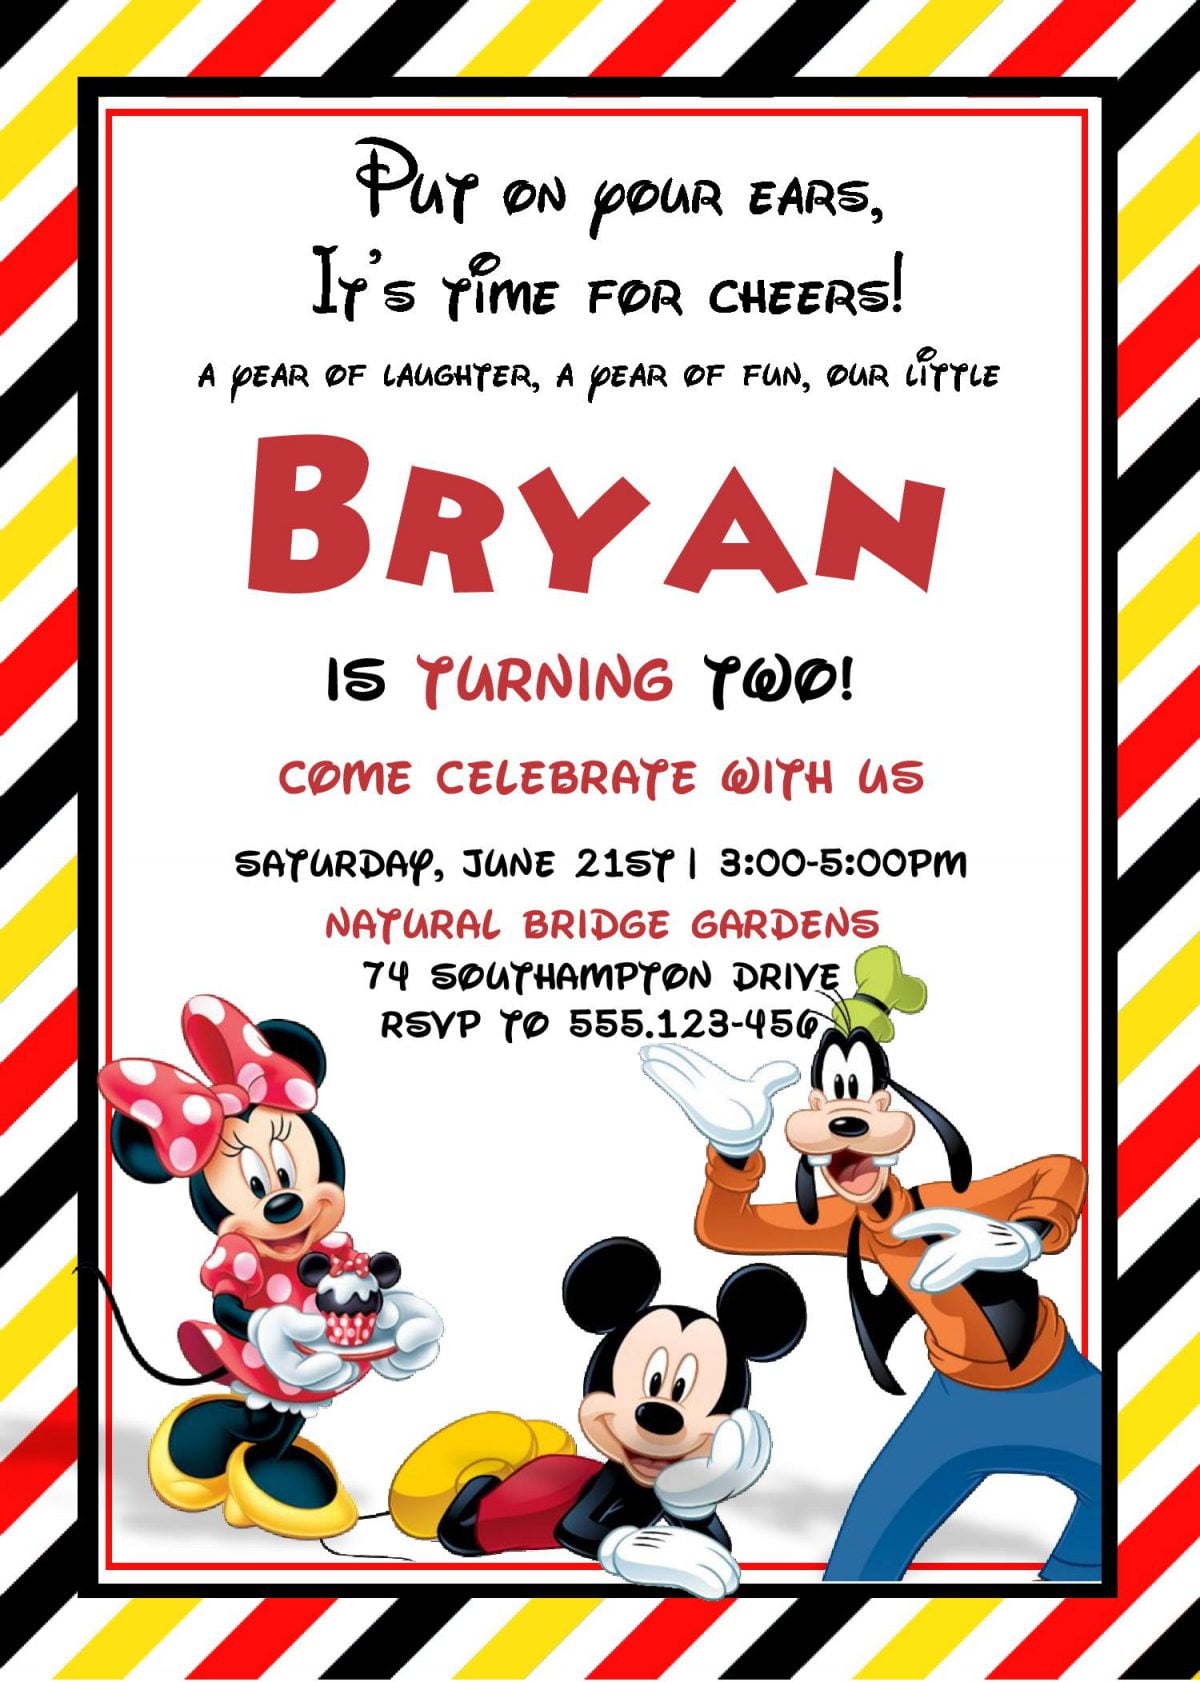 Cute Mickey Mouse Invitation Templates - Editable With MS Word and has colorful diagonal stripes